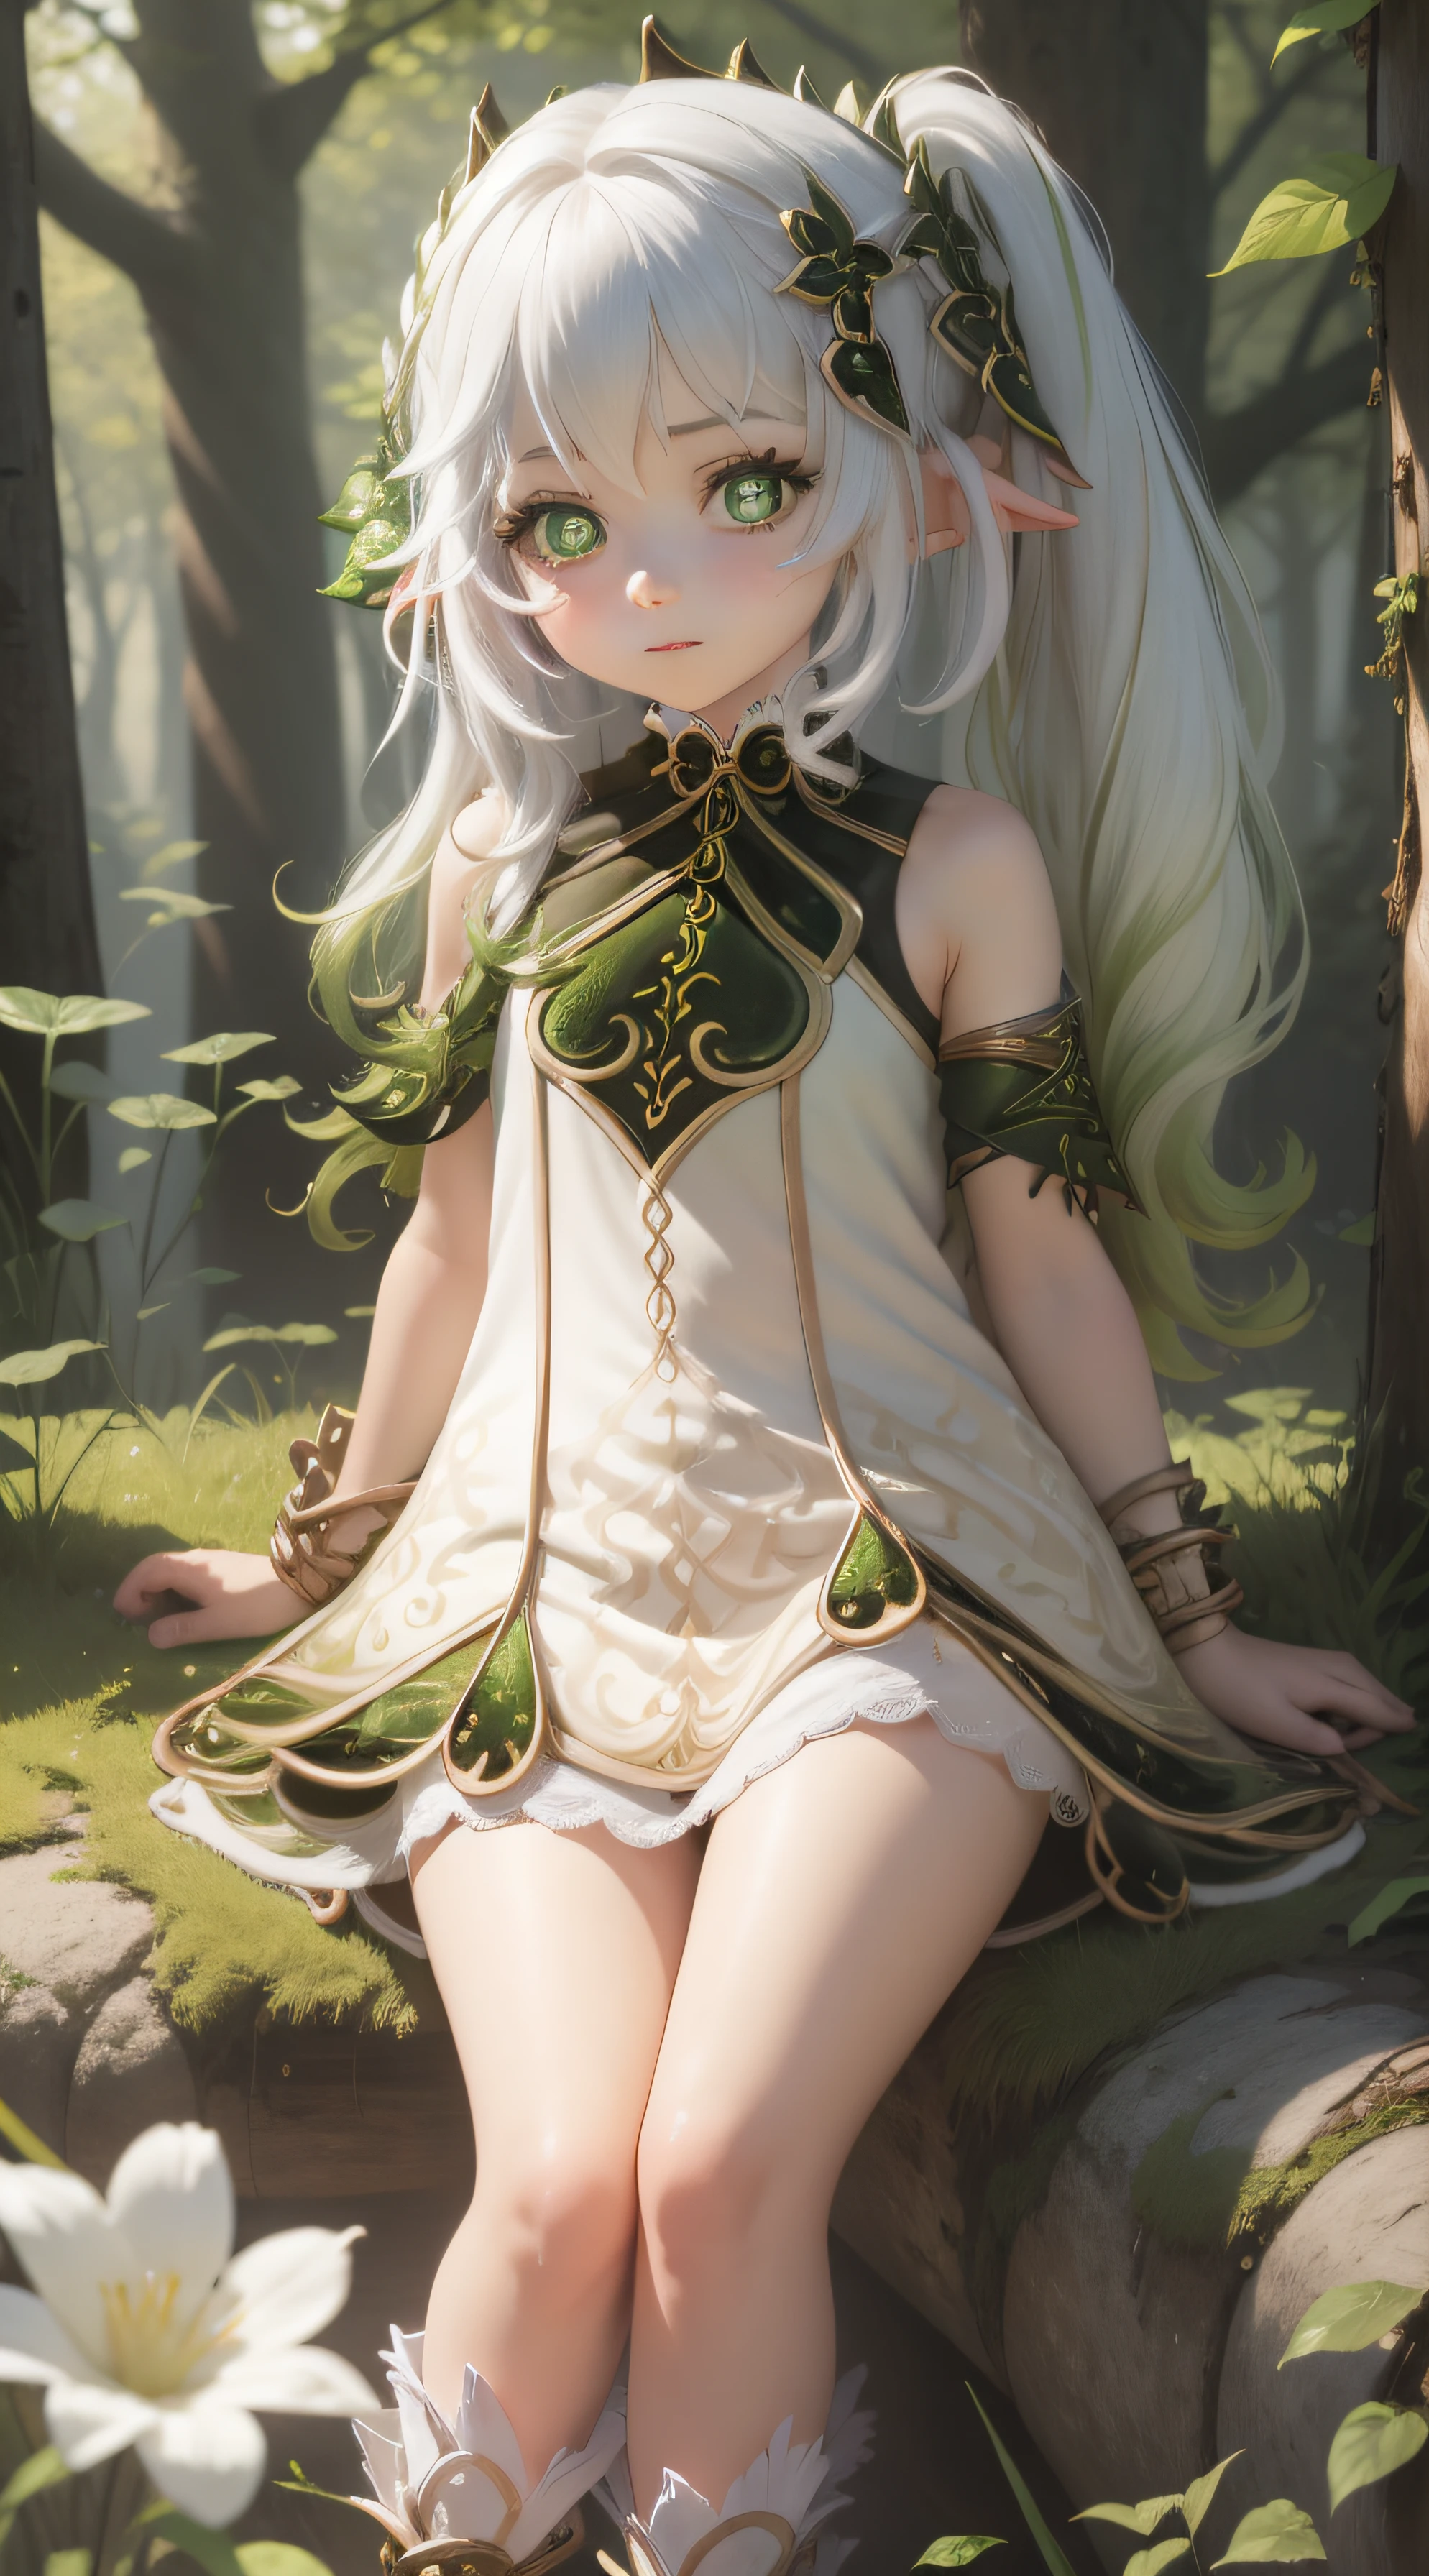 1 girl, , 3D, small world, cute, (feet: 1.3), mischievous face, pale skin, white_hair, looking at the audience, sitting, meadow, forest, spring, available light, full body, symbol shaped pupils,